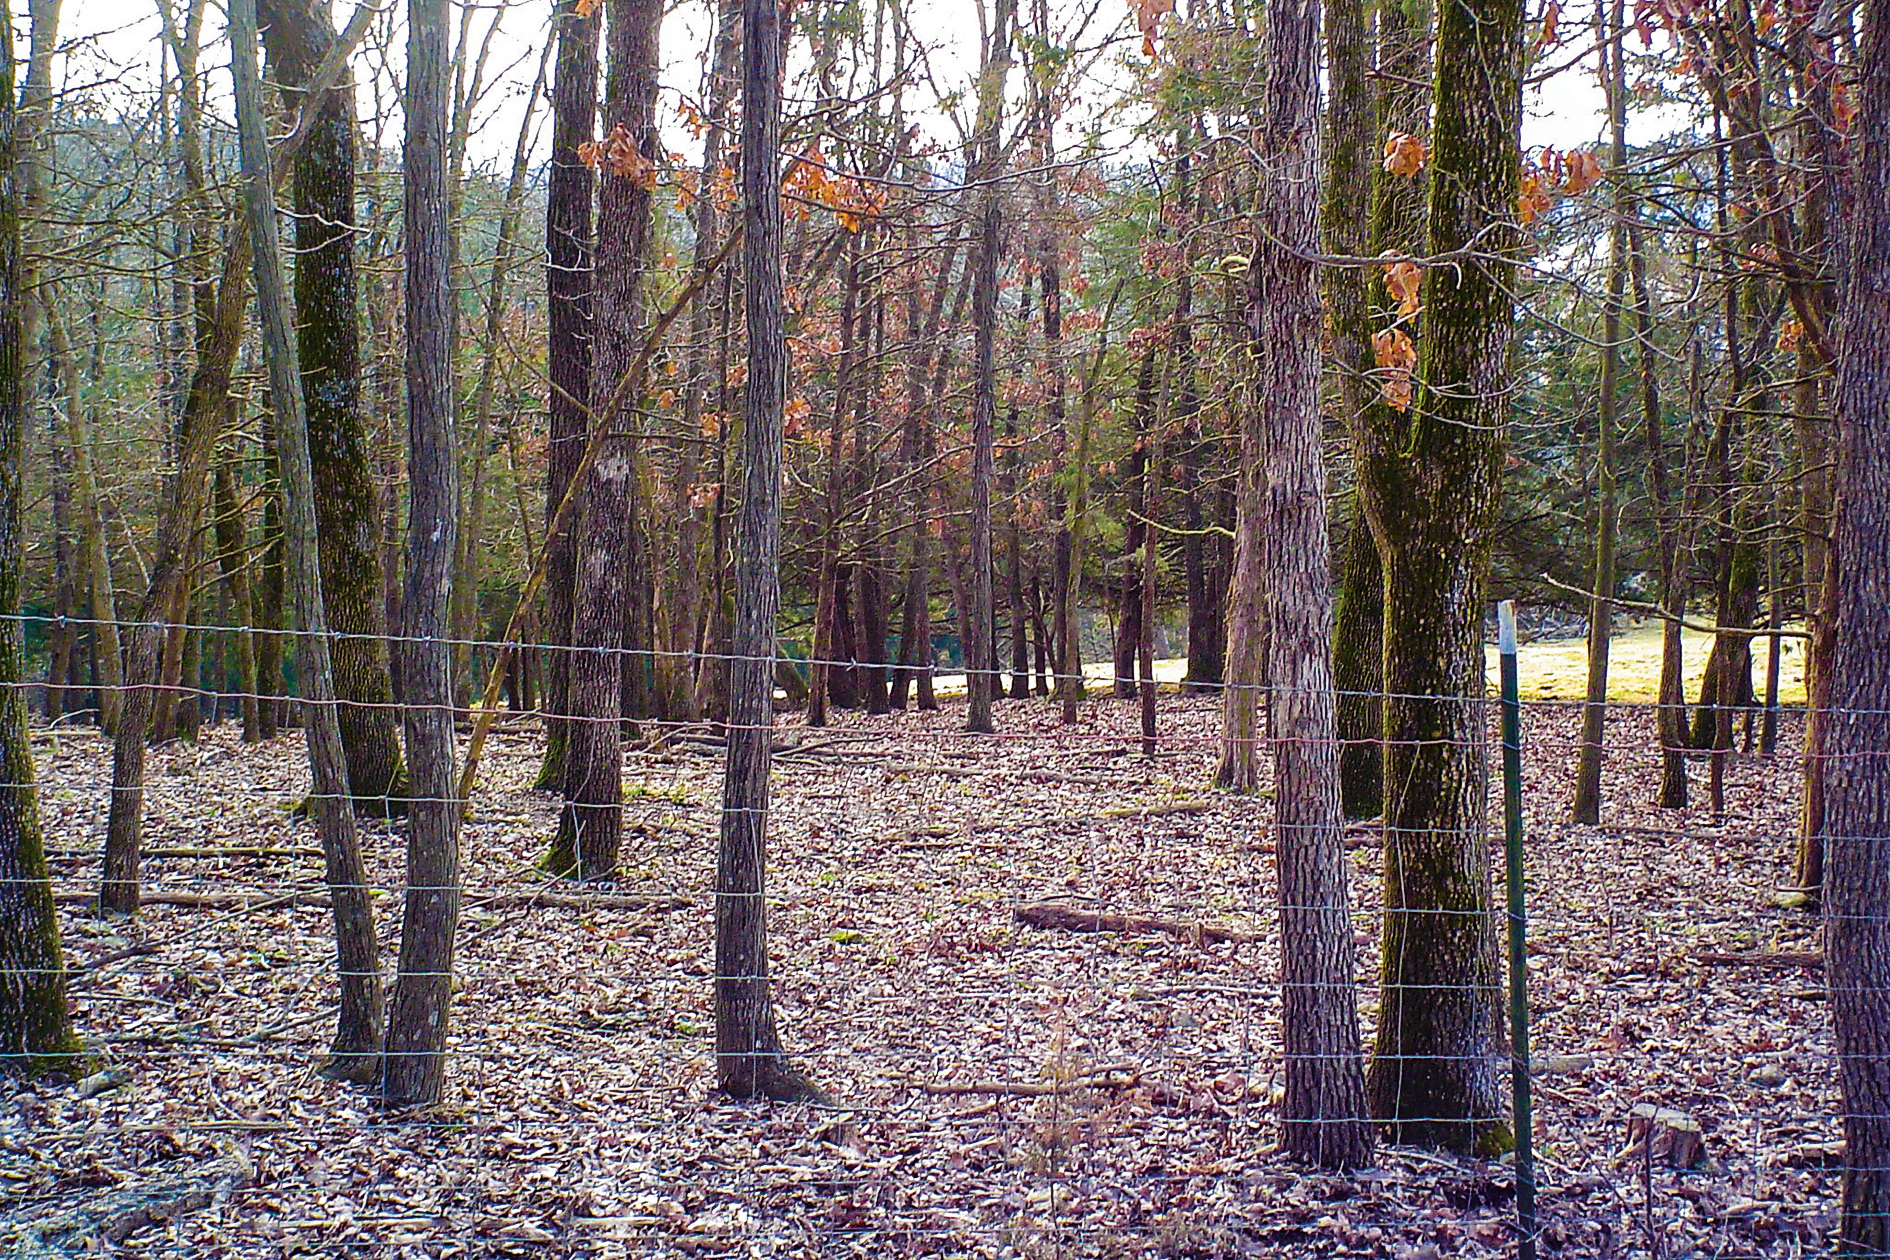 Wooded area with no understory vegetation between trees